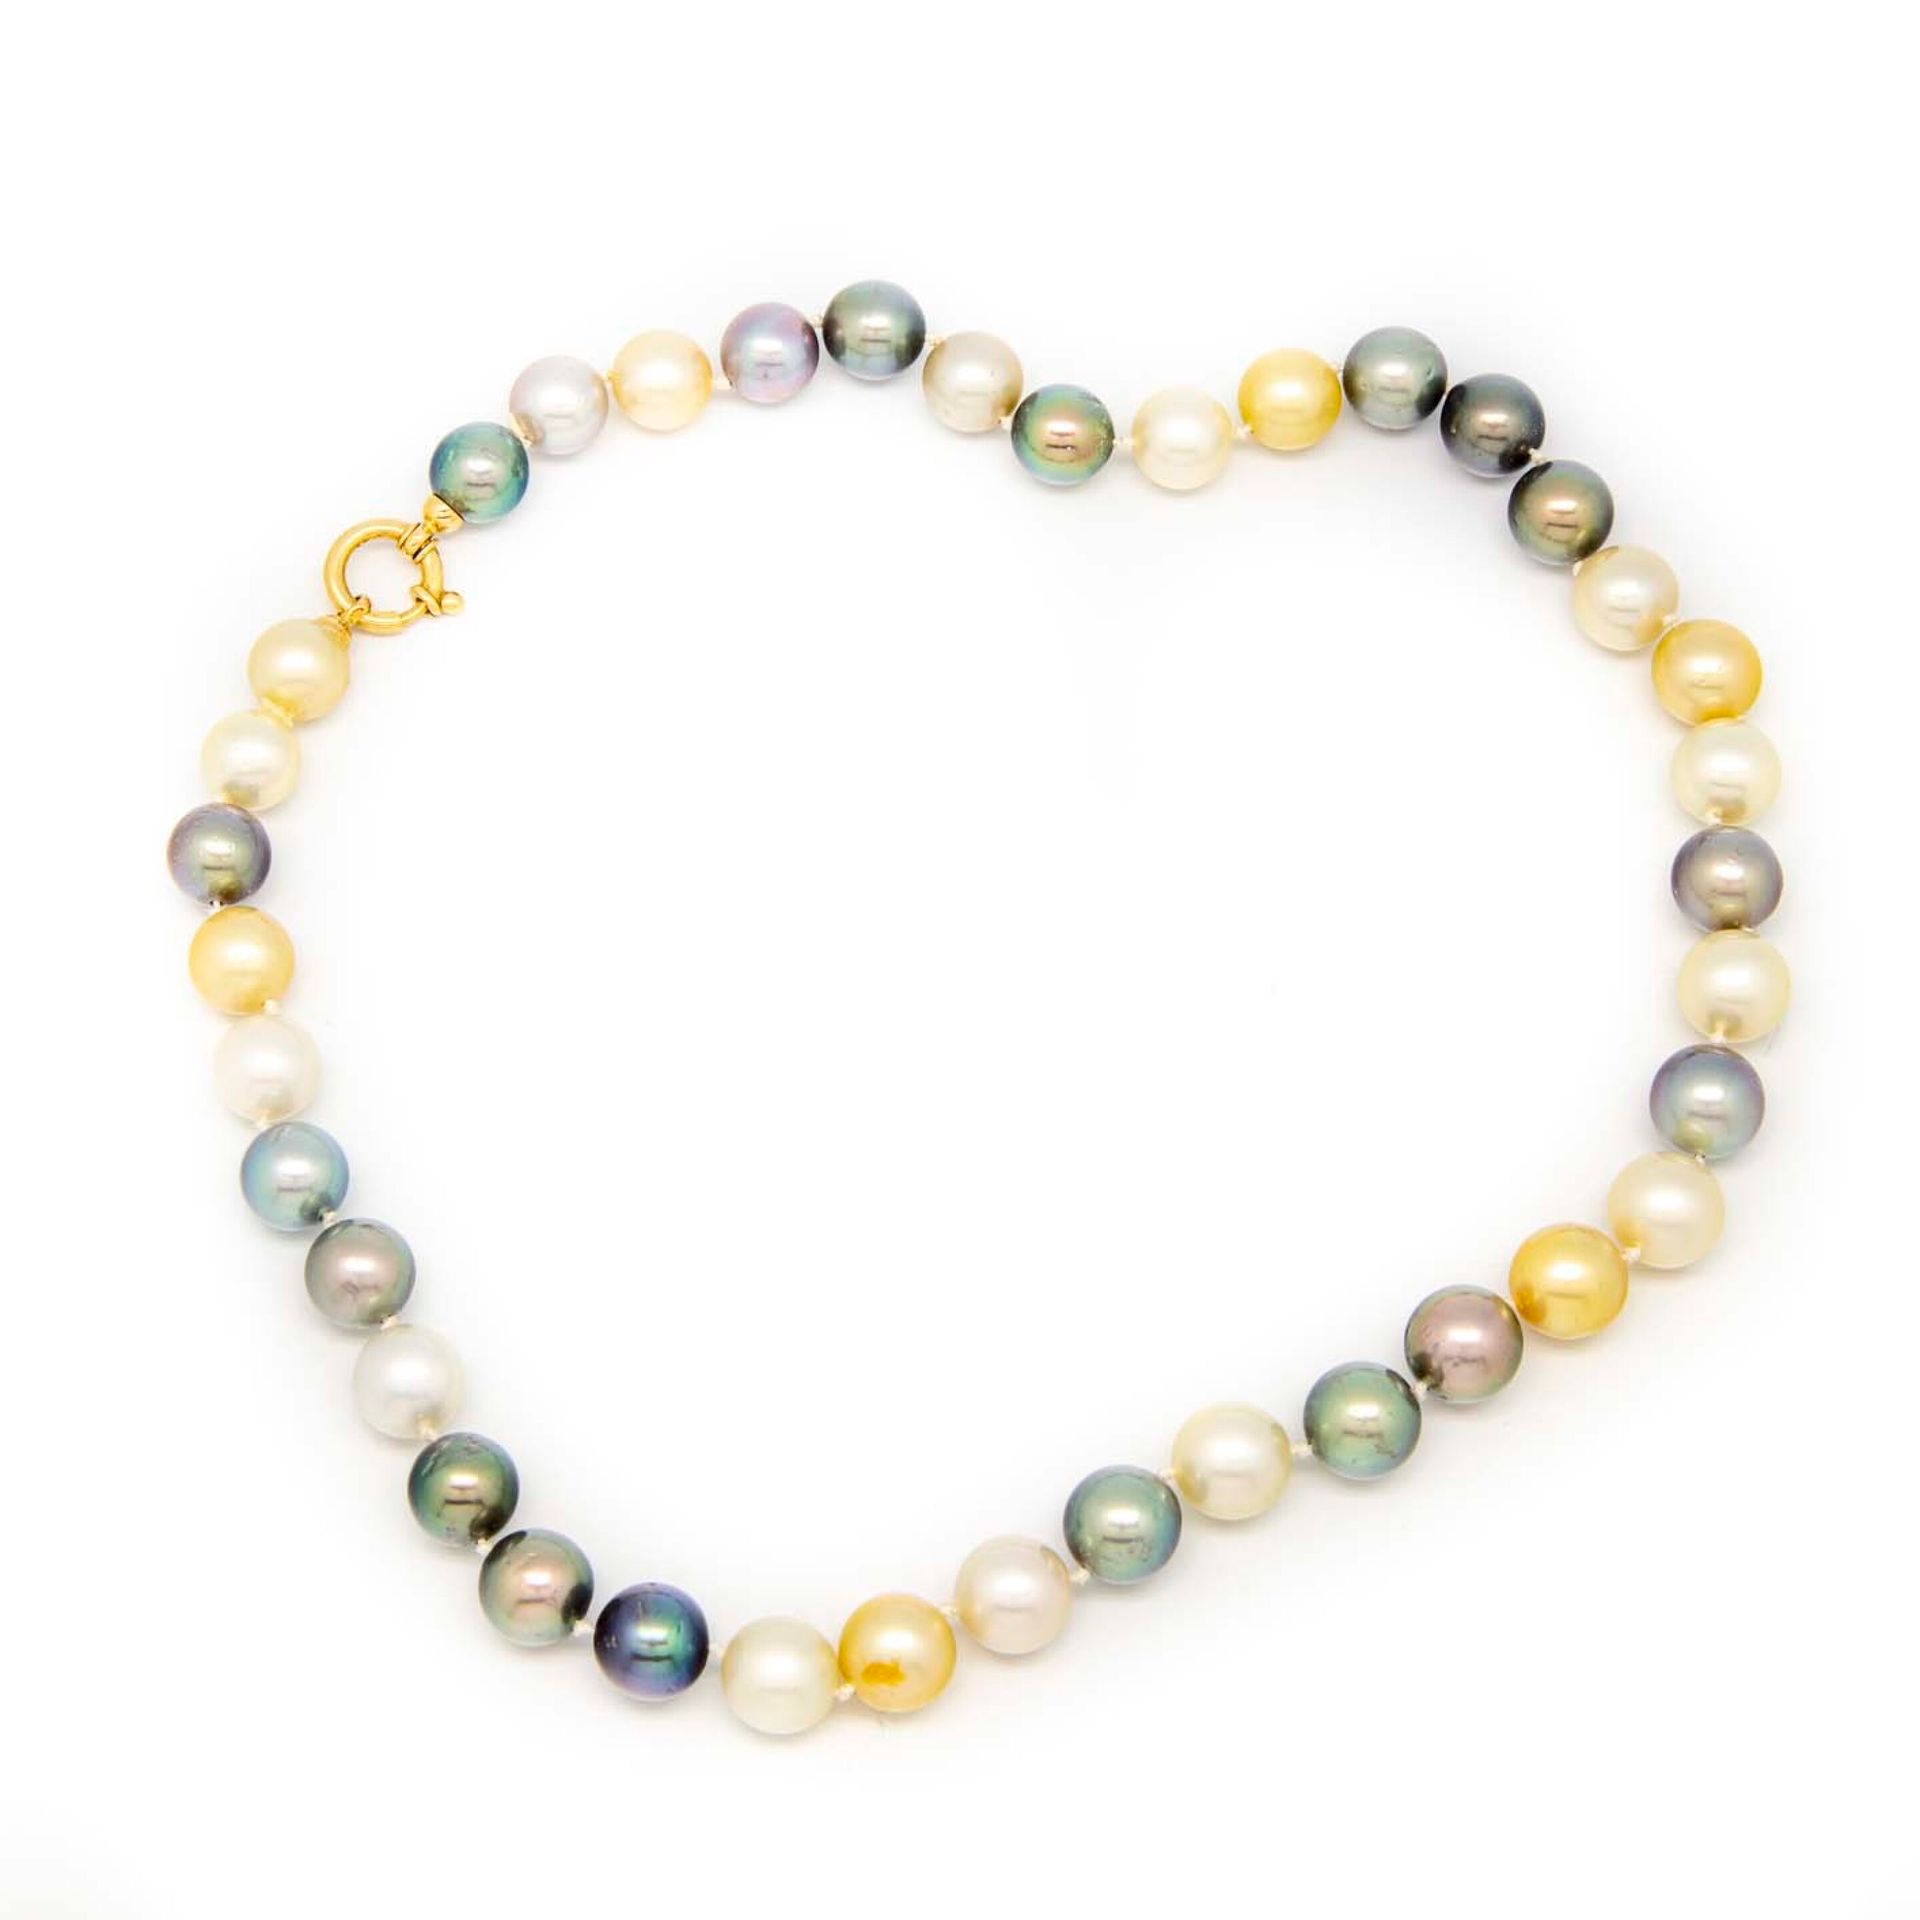 Null Necklace of 38 Tahitian river pearls, gold clasp